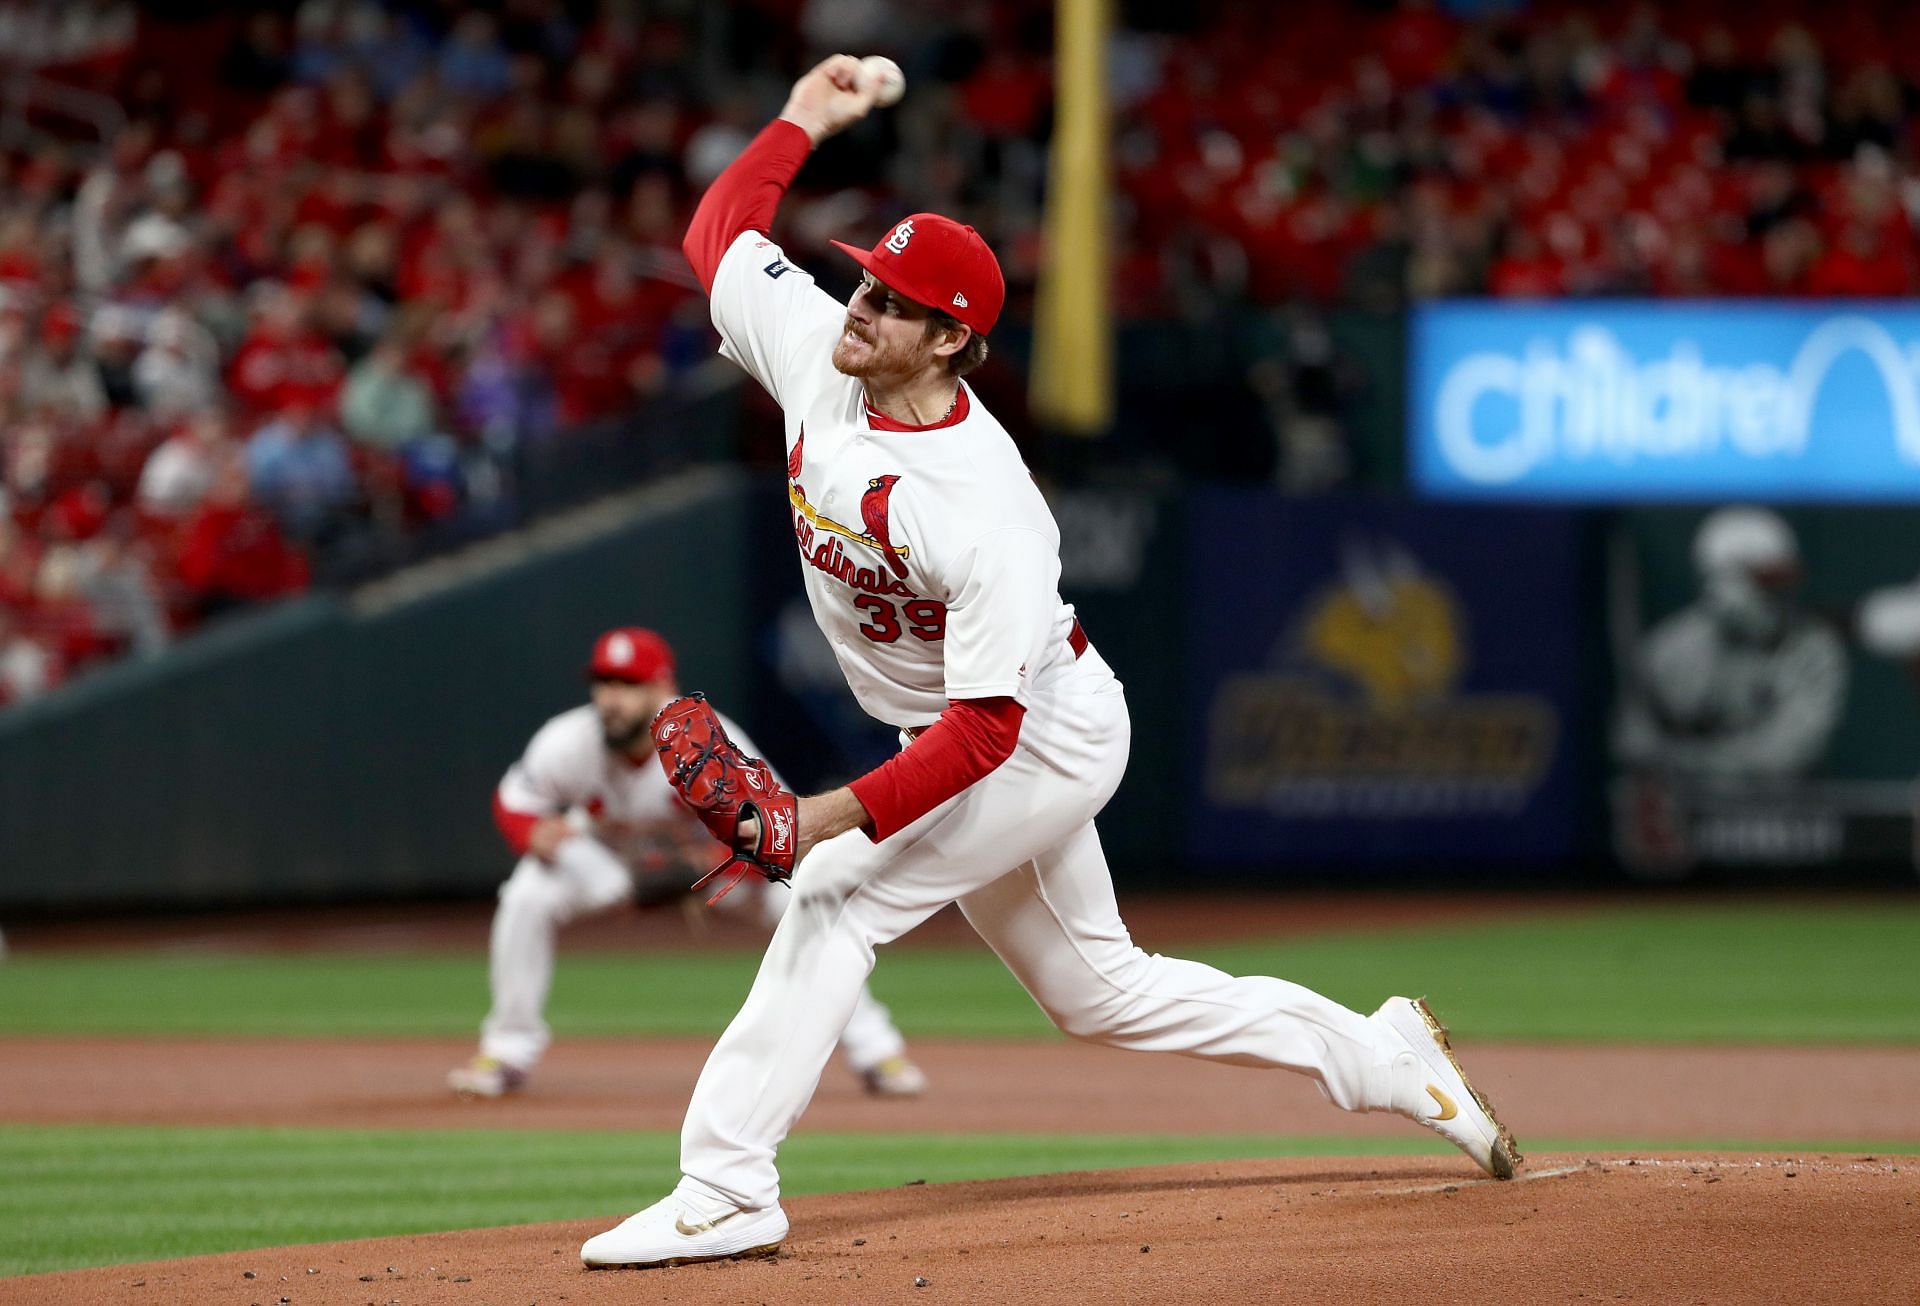 Mikolas #39 of the St. Louis Cardinals throws a pitch against the Washington Nationals during the first inning in game one of the National League Championship Series at Busch Stadium on October 11, 2019 in St Louis, Missouri.